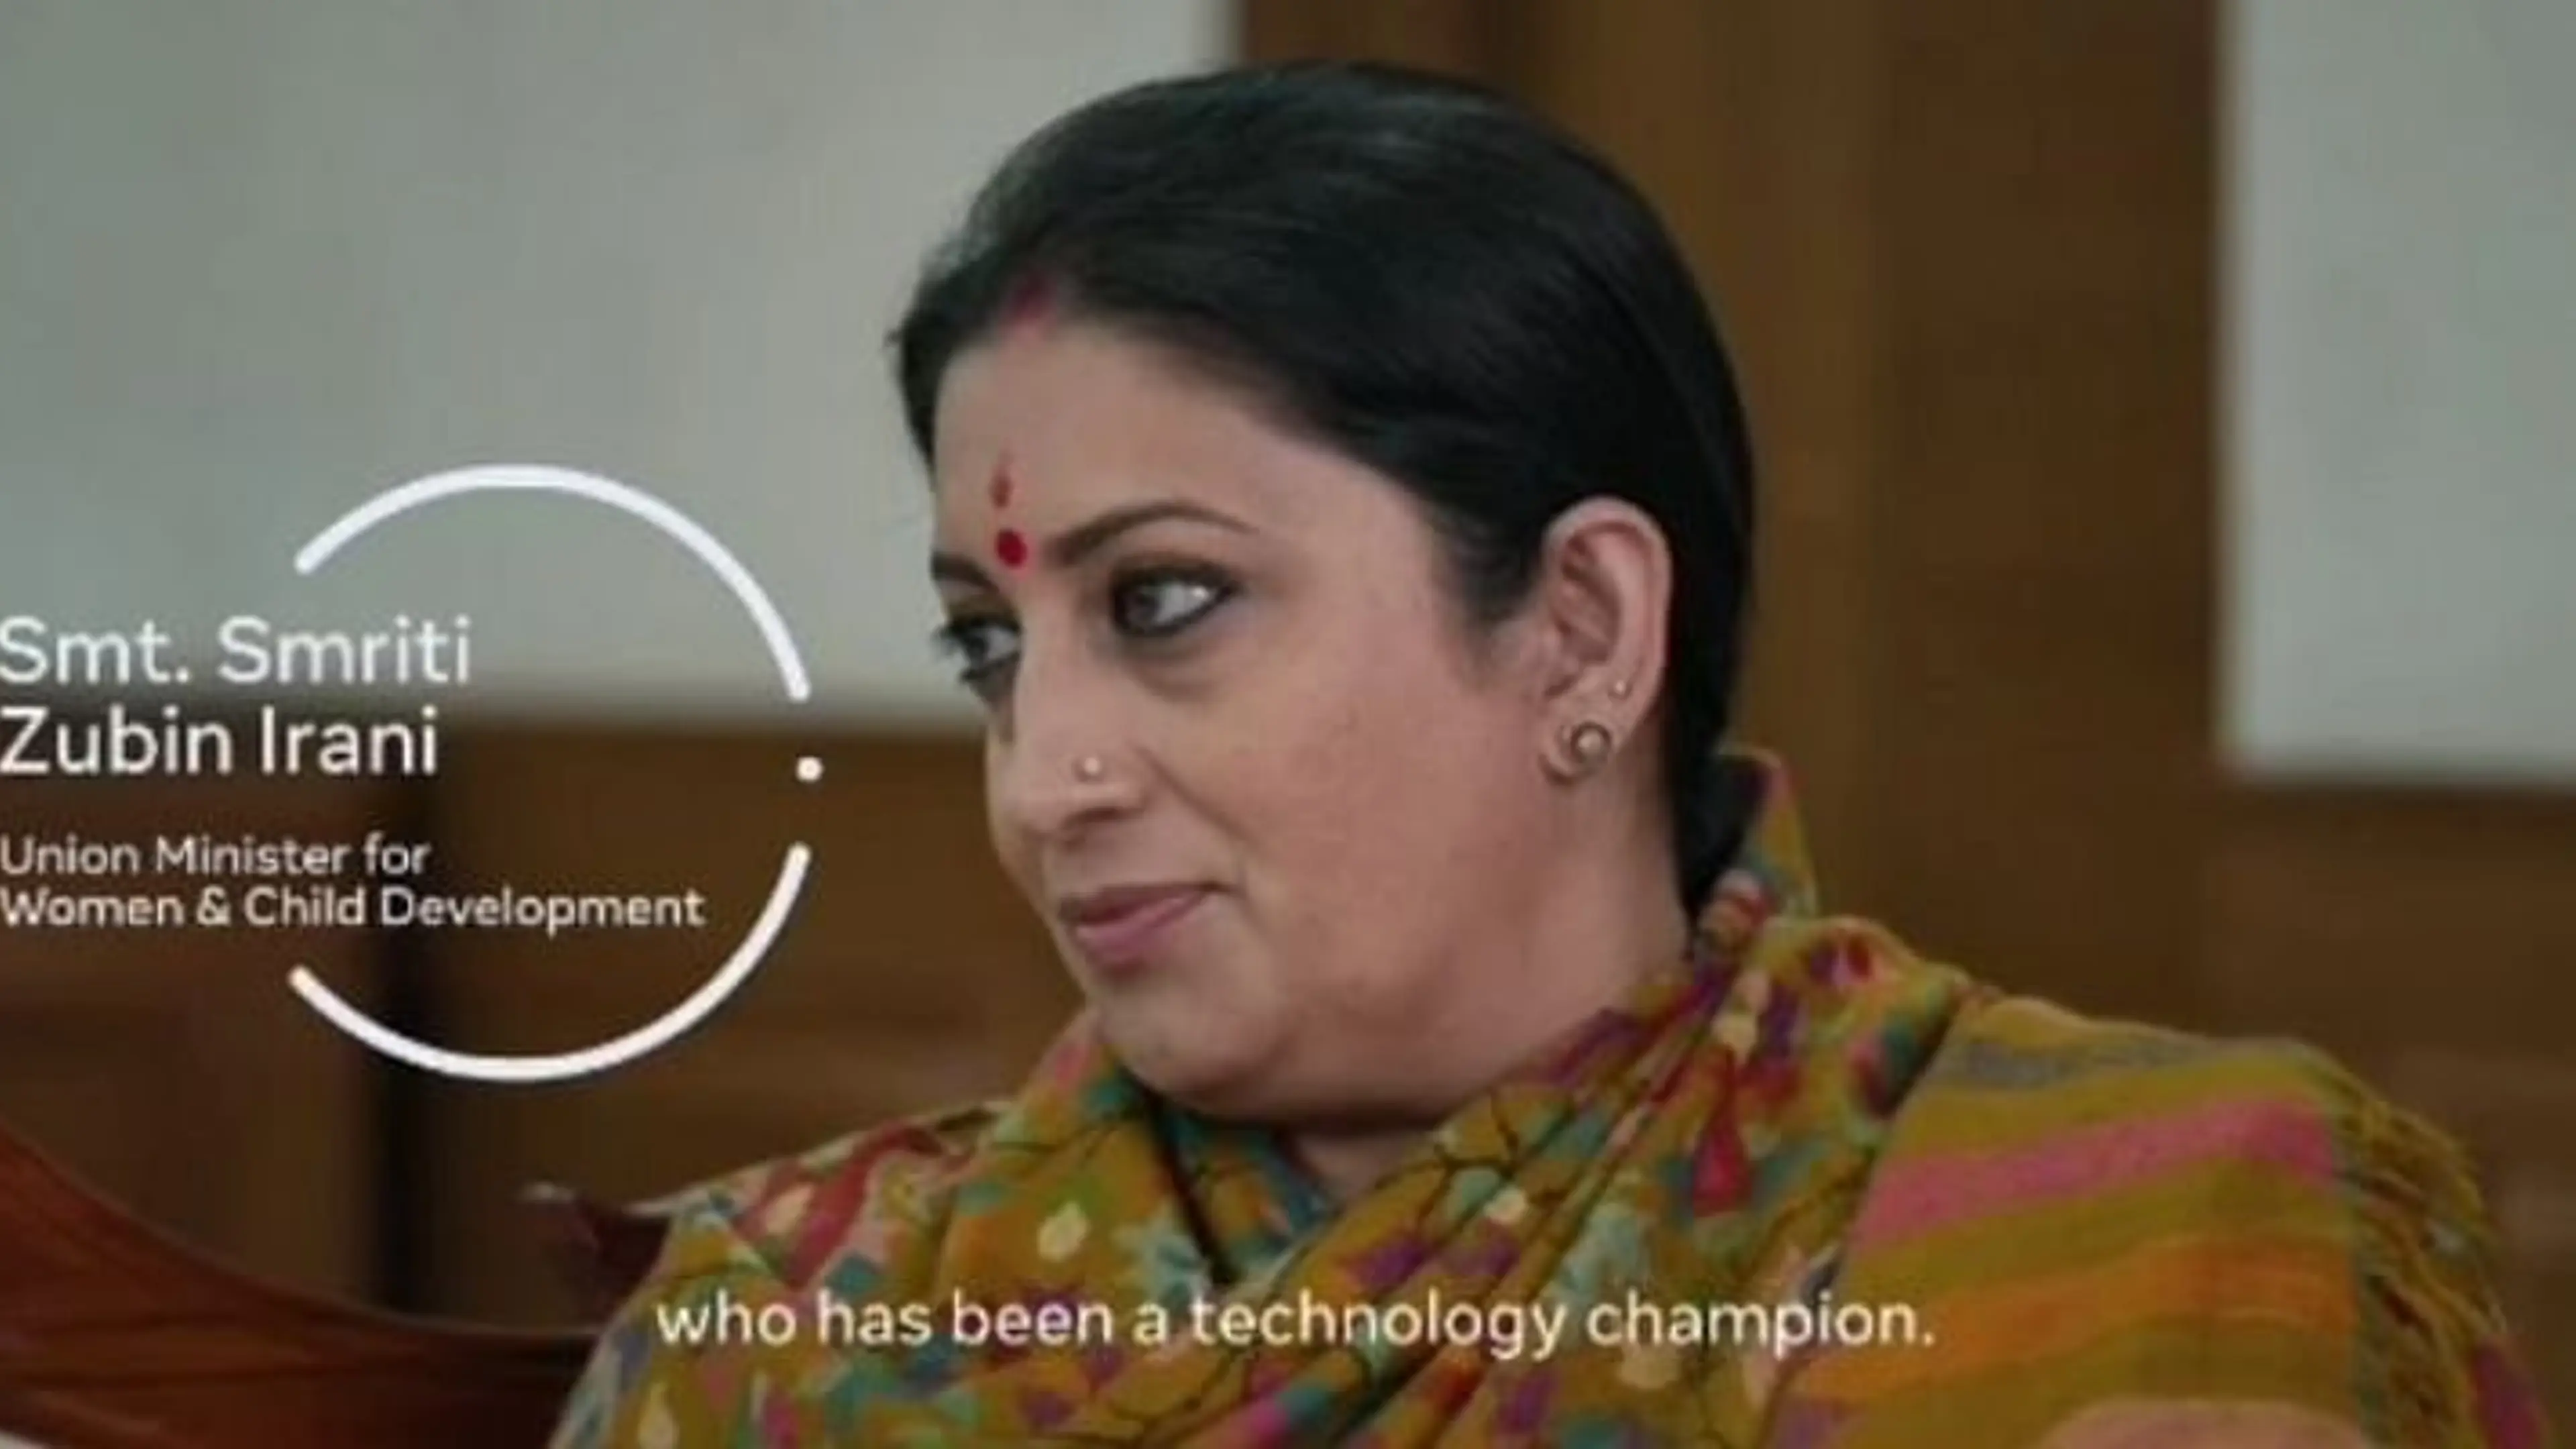 Technology is a leveller in financial services, says Smriti Irani, Union Minister, Women and Child Development